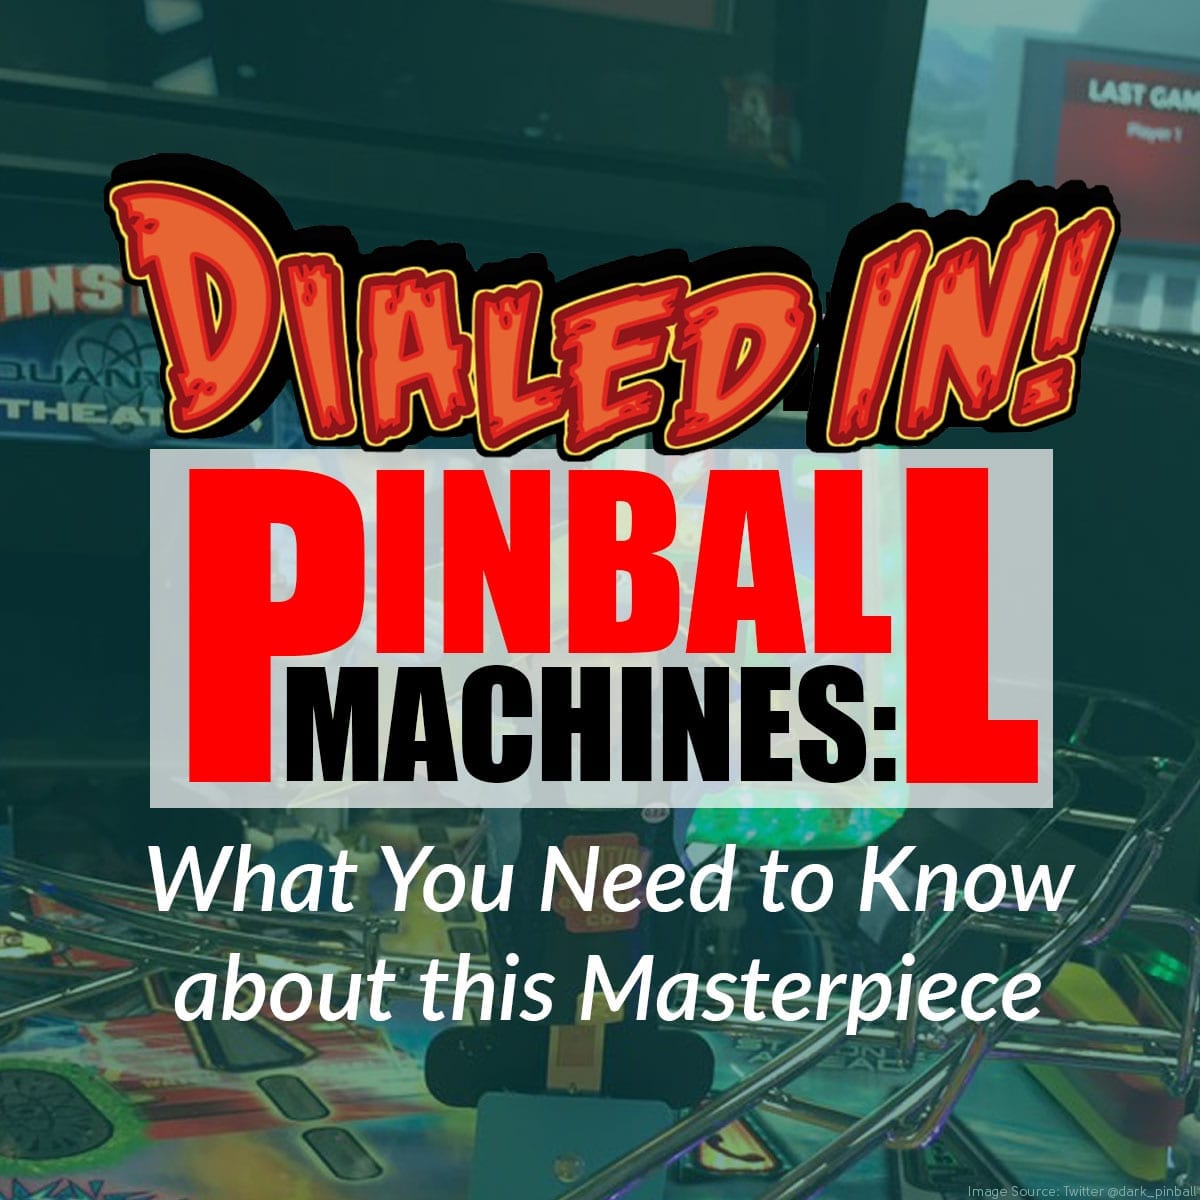 Dialed In Pinball Machine: What You Need to Know about this Masterpiece